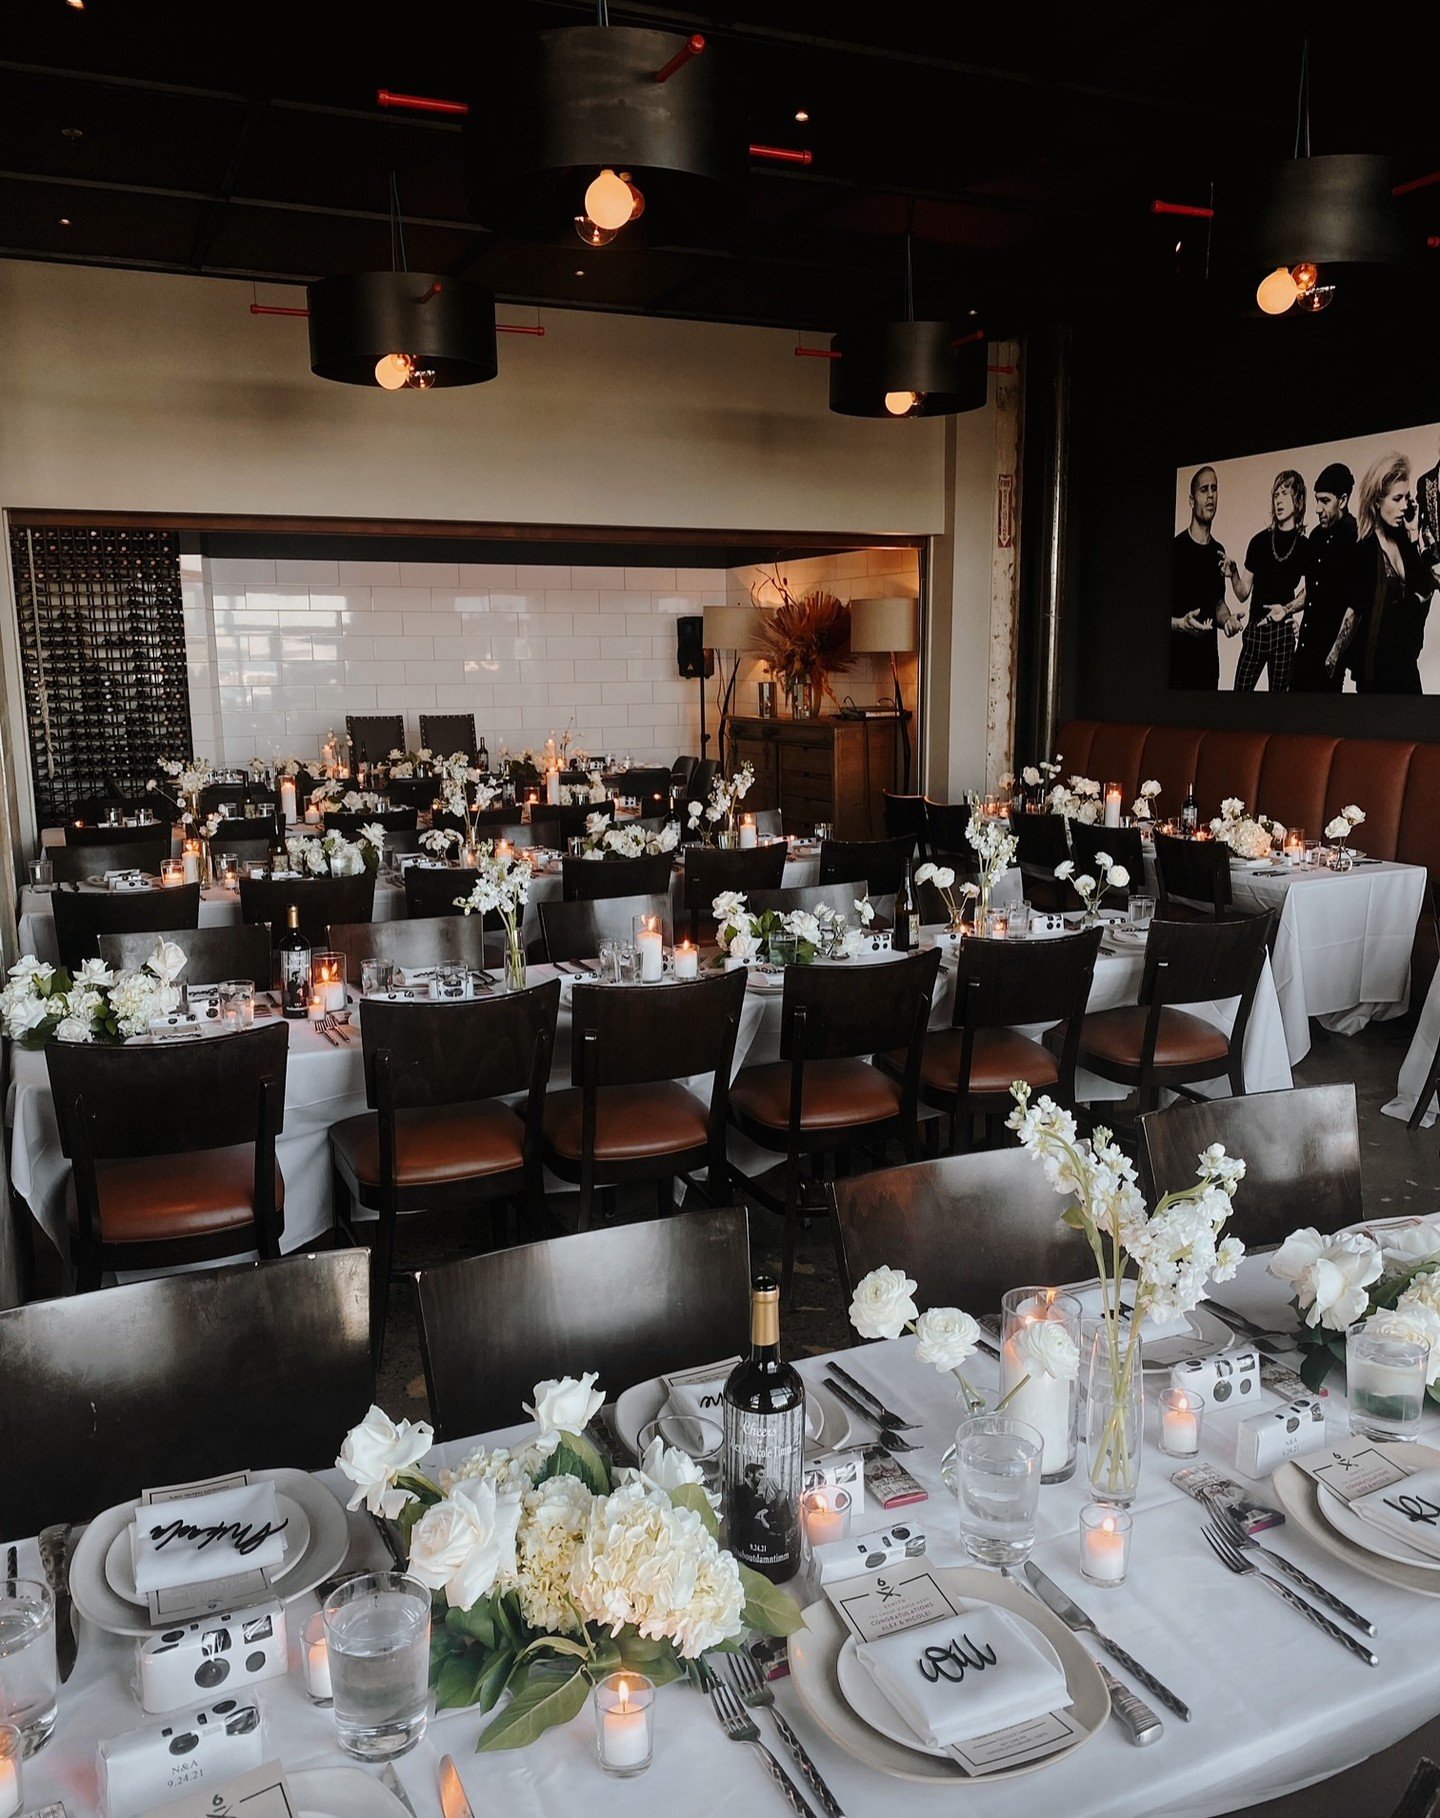 We love when guests bring in custom decorations! Got an idea? Reach out to our event team via the link in our bio to get started!

#lakeminnetonka #wayzatamn #privateparty #privatedining #groupdining #twincities #minneapolis #lakesidewedding #rehears